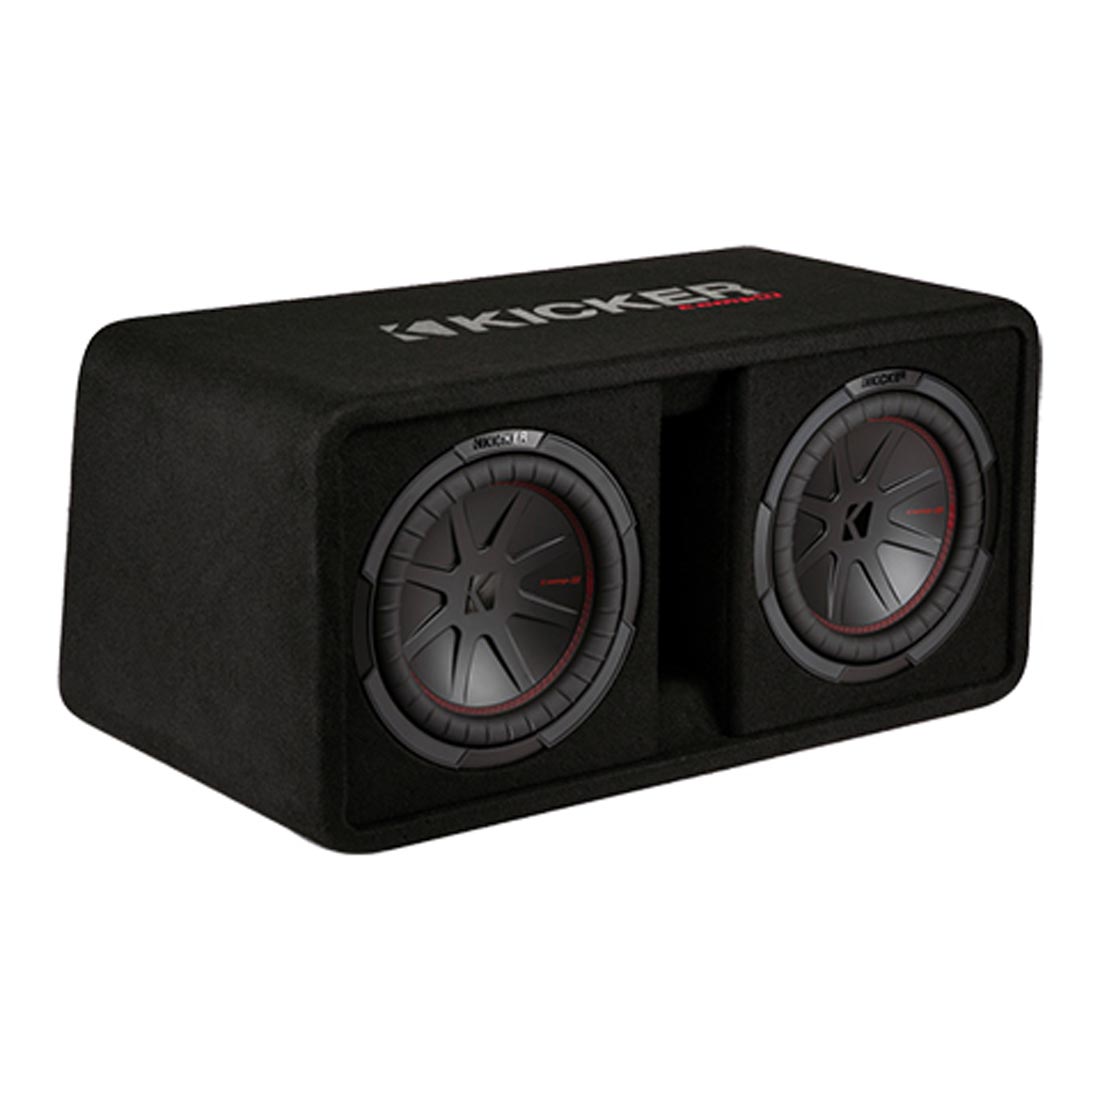 Kicker 48DCWR102 2-Ohm Ported Enclosure with Dual 10" CompR Subwoofers